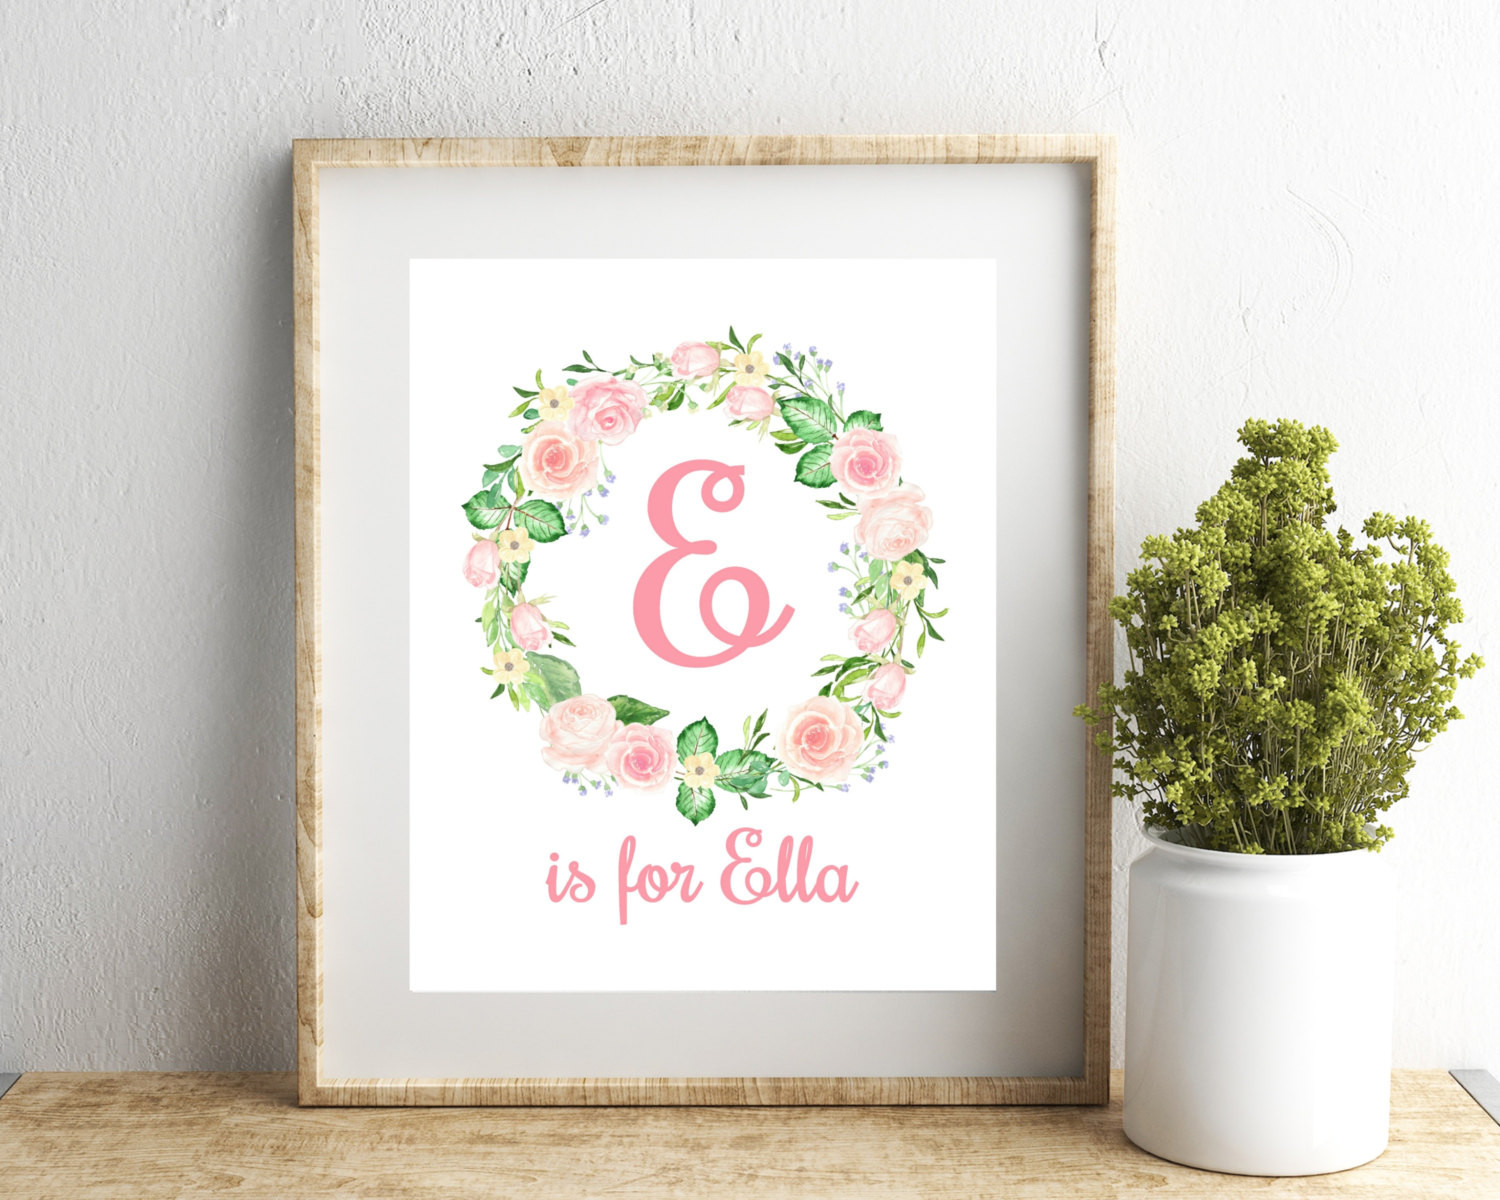 Personalized Baby Wall Decor
 Personalized Nursery Print Baby Girl Nursery Wall Decor